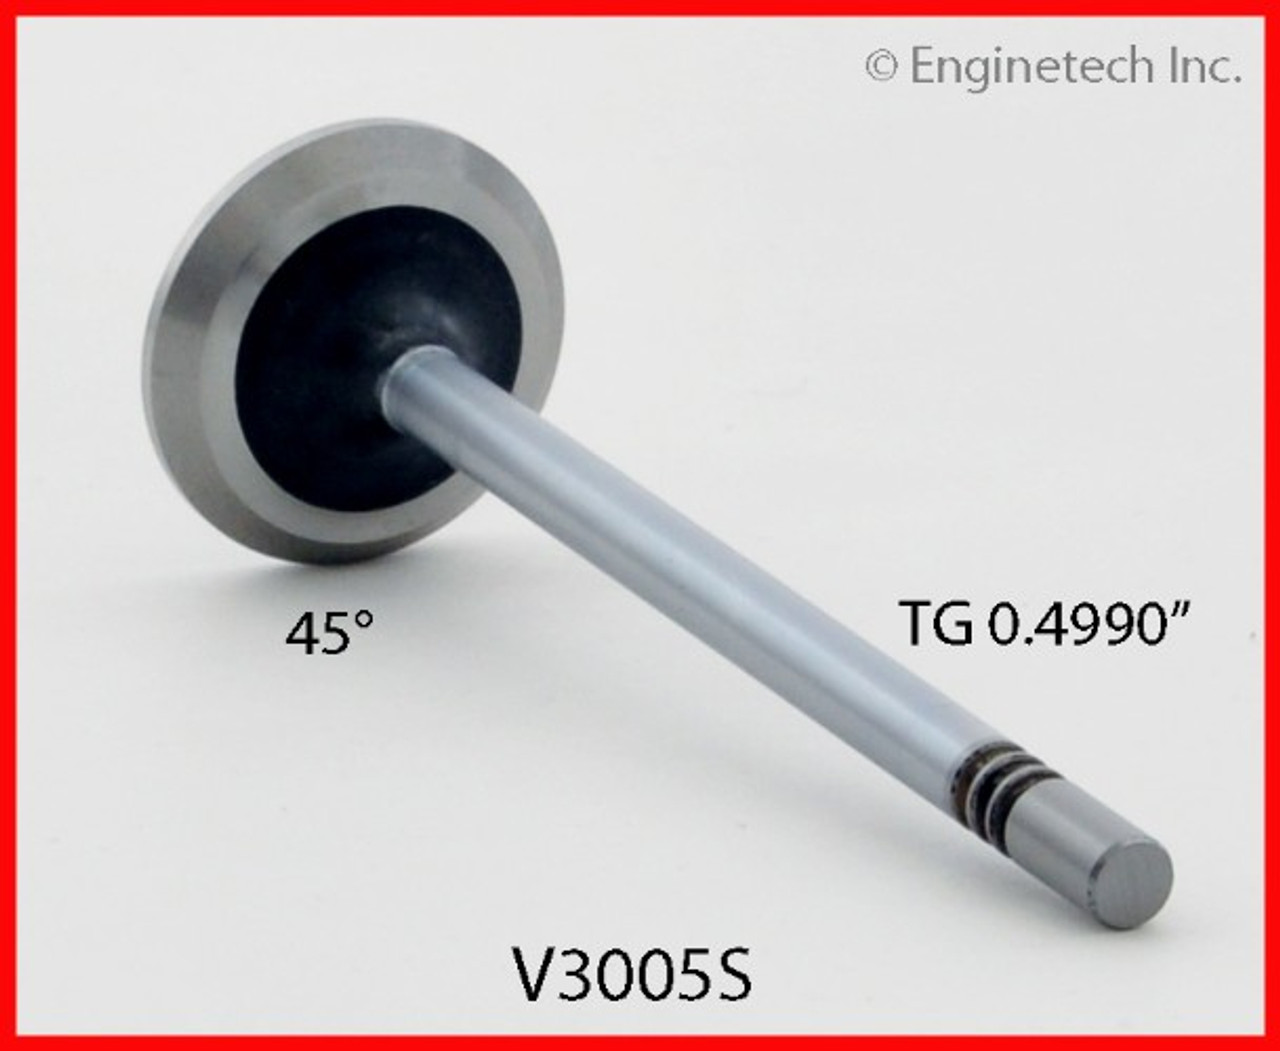 2000 Ford F-250 Super Duty 6.8L Engine Exhaust Valve V3005S -30